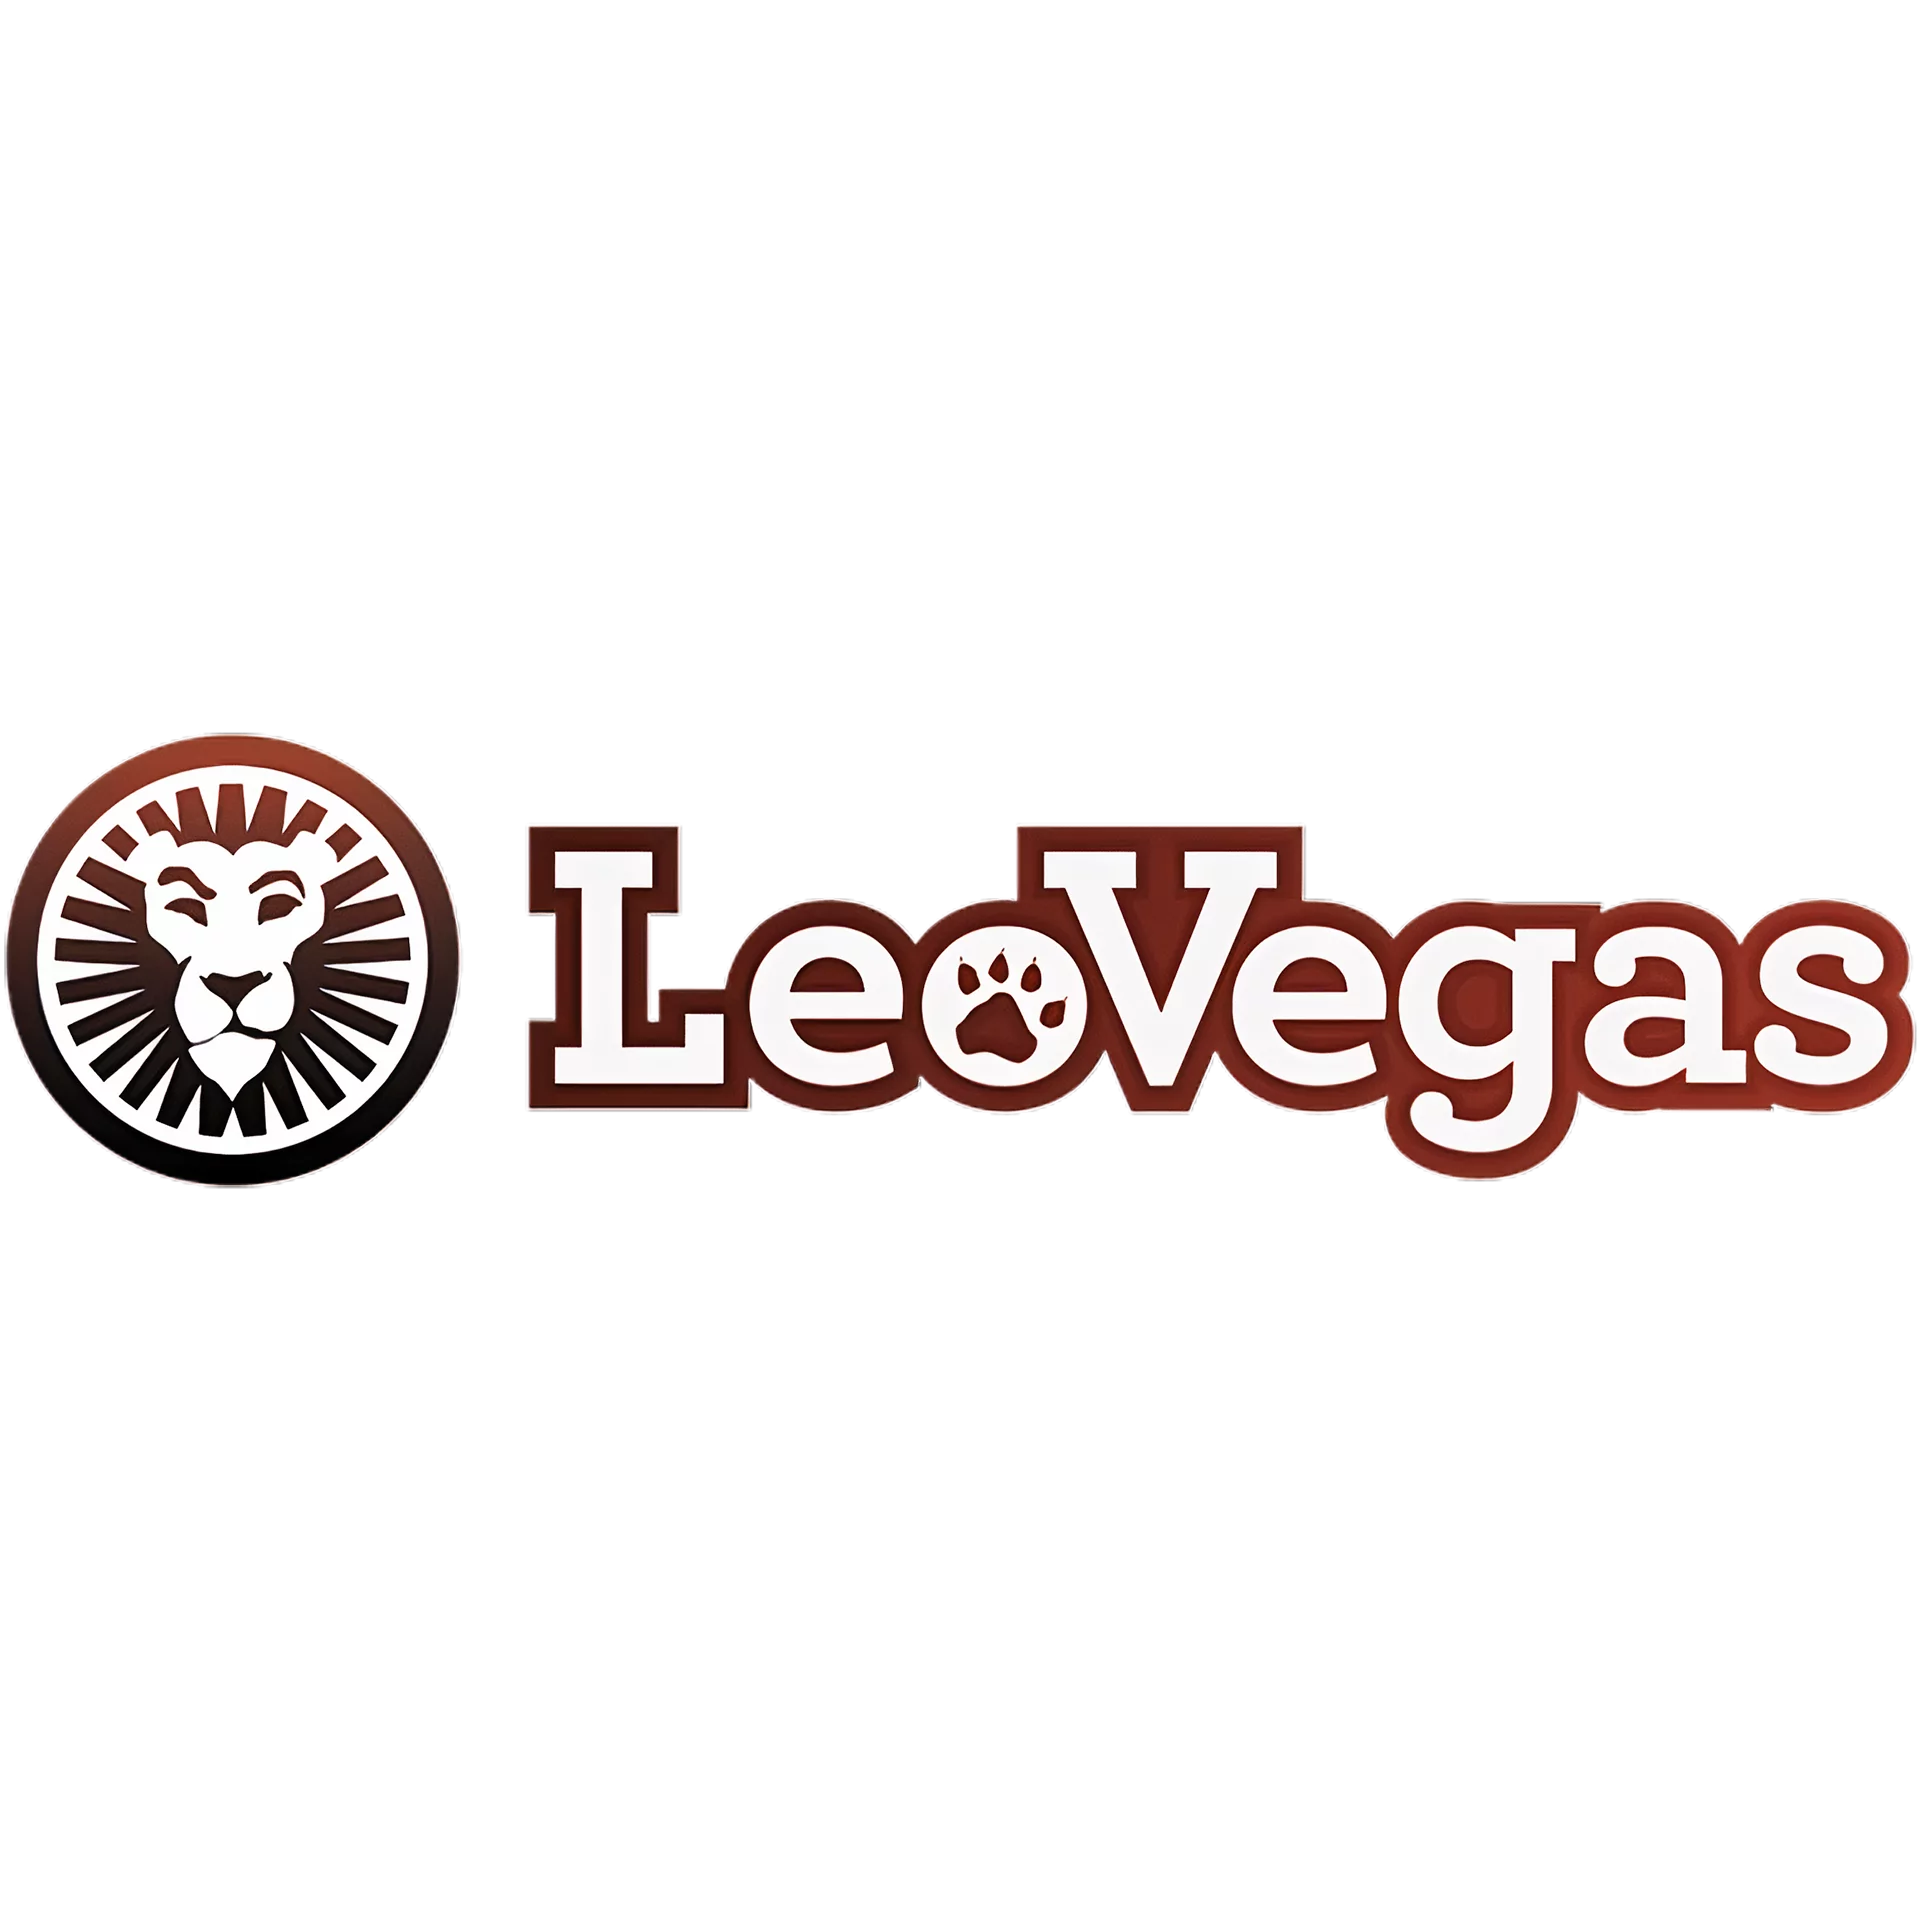 Sign up for LeoVegas, get a bonus and start winning from betting.